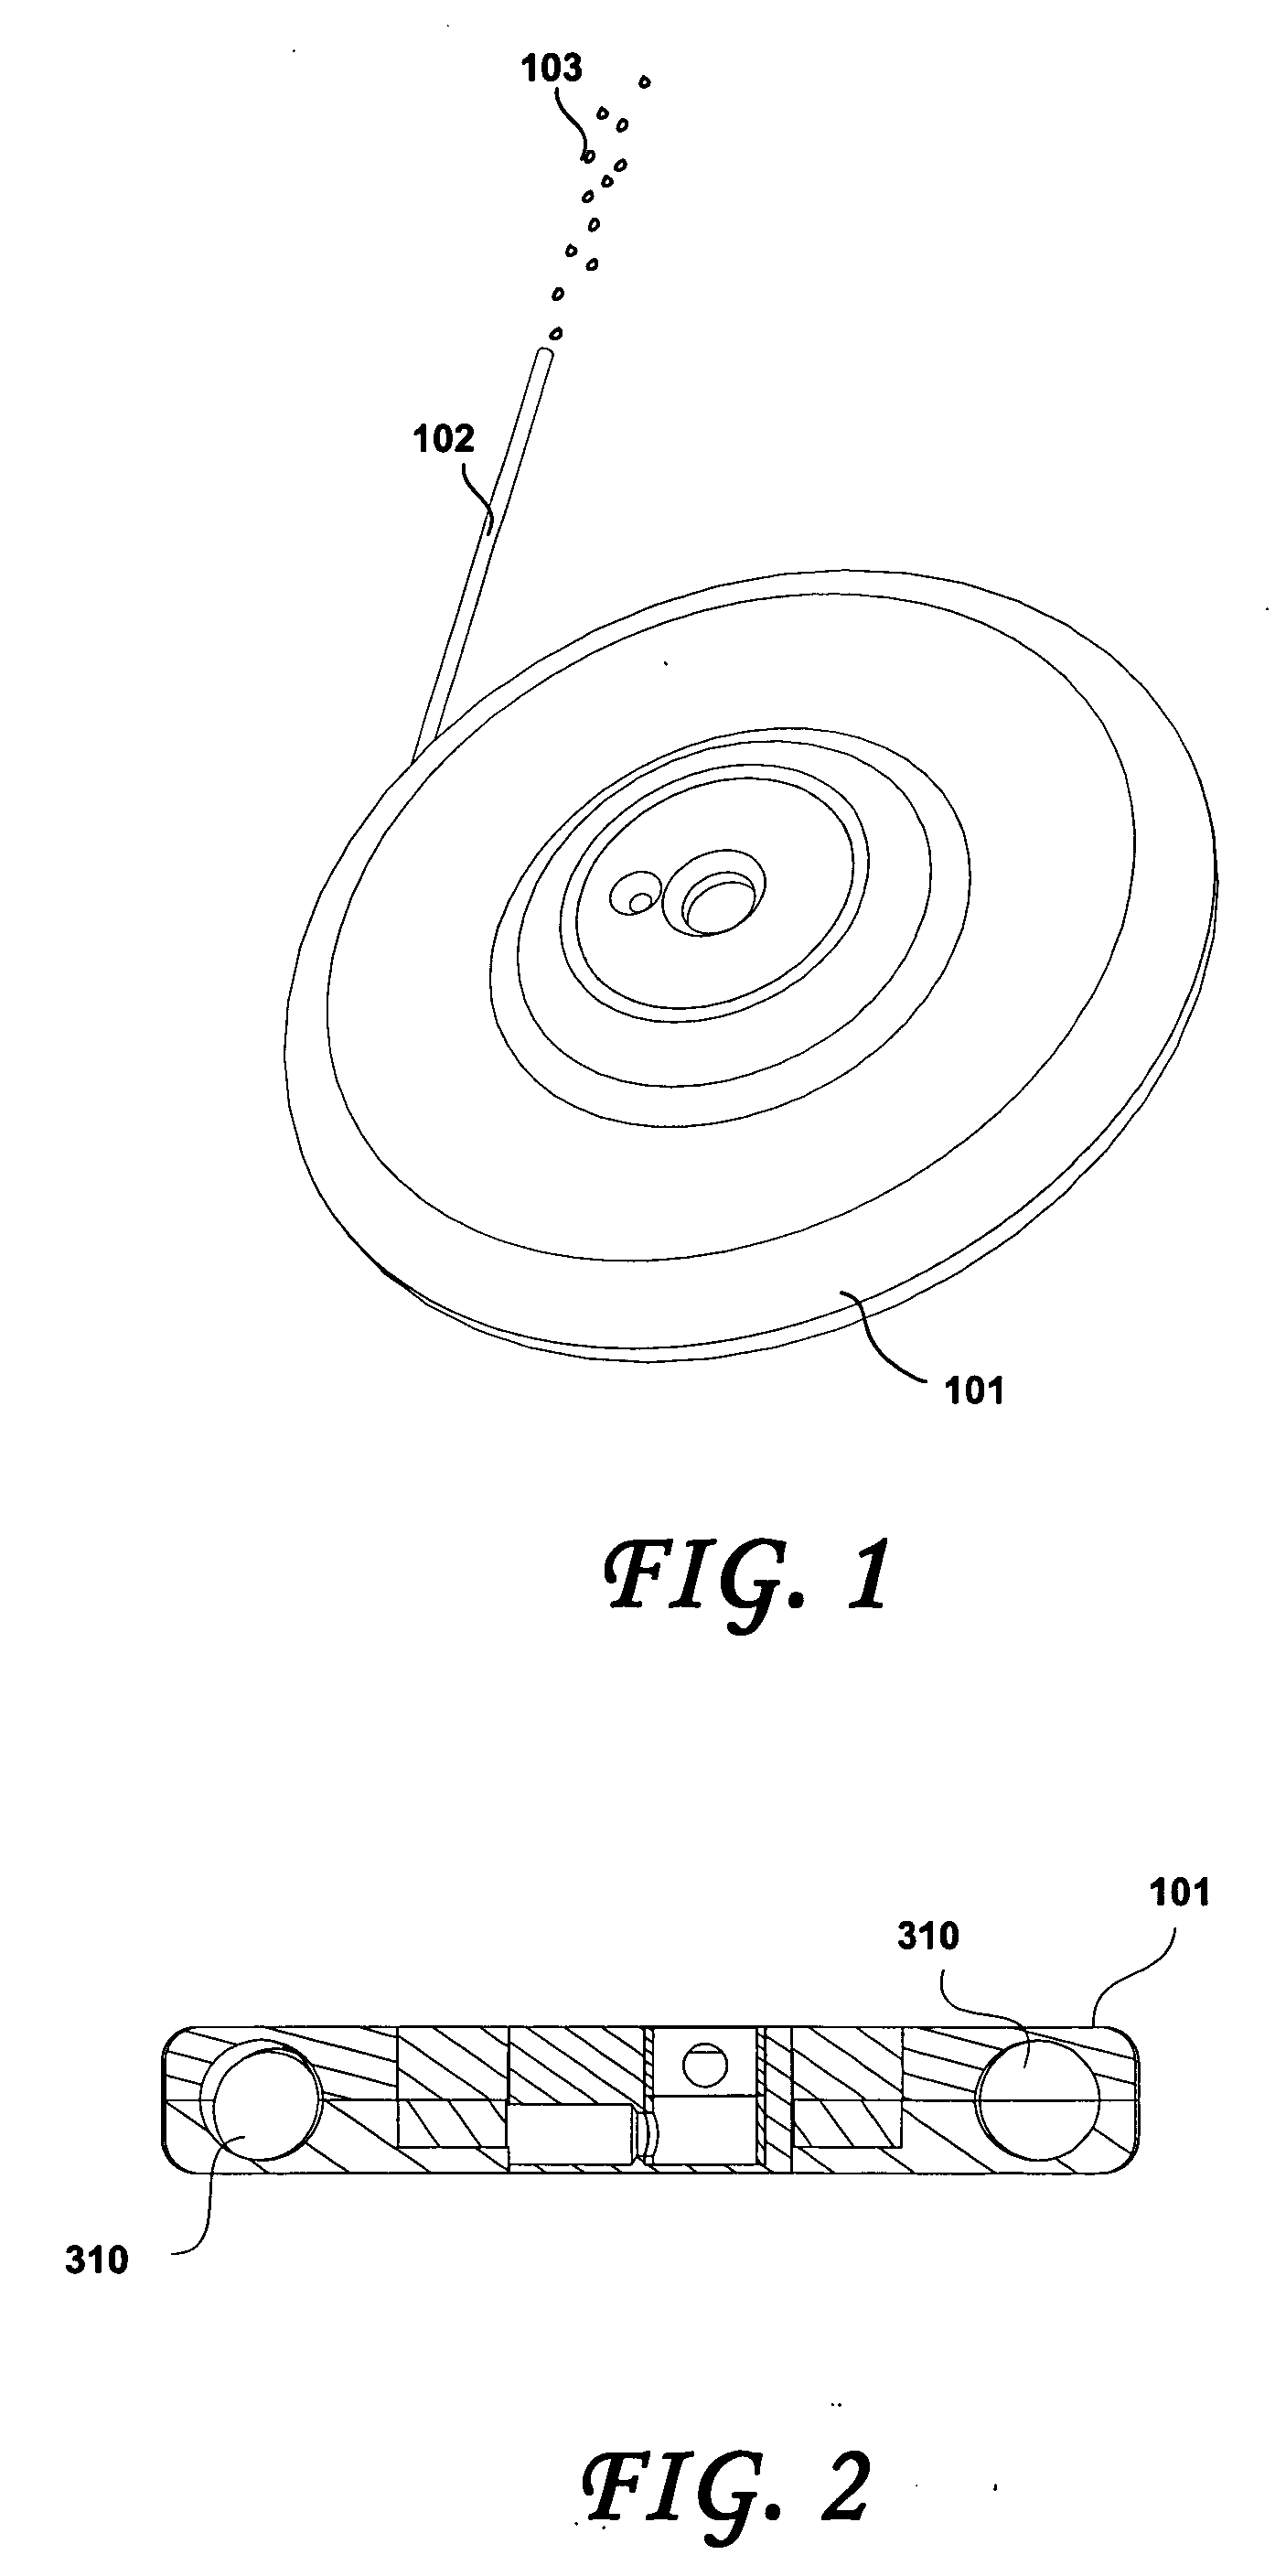 Implantable device, formulation and method for anti-psychotic therapy using risperidone